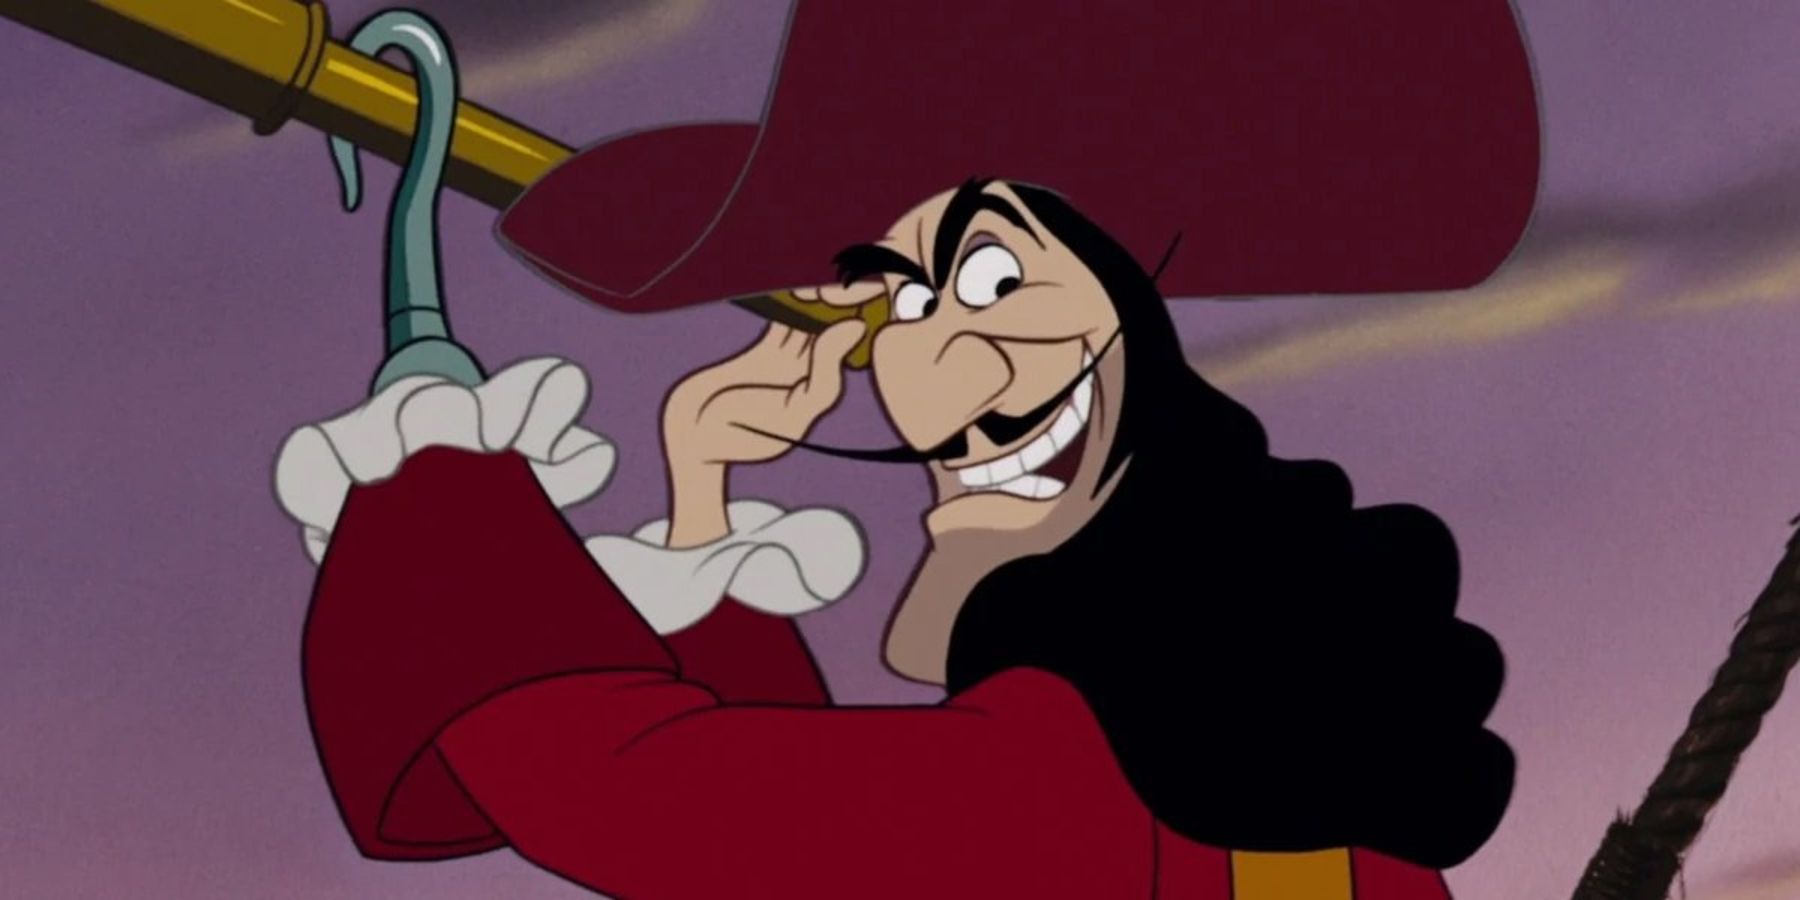 Cruella 5 Disney Villains That Could Also Be Redeemed (& 5 That Are Too Evil)